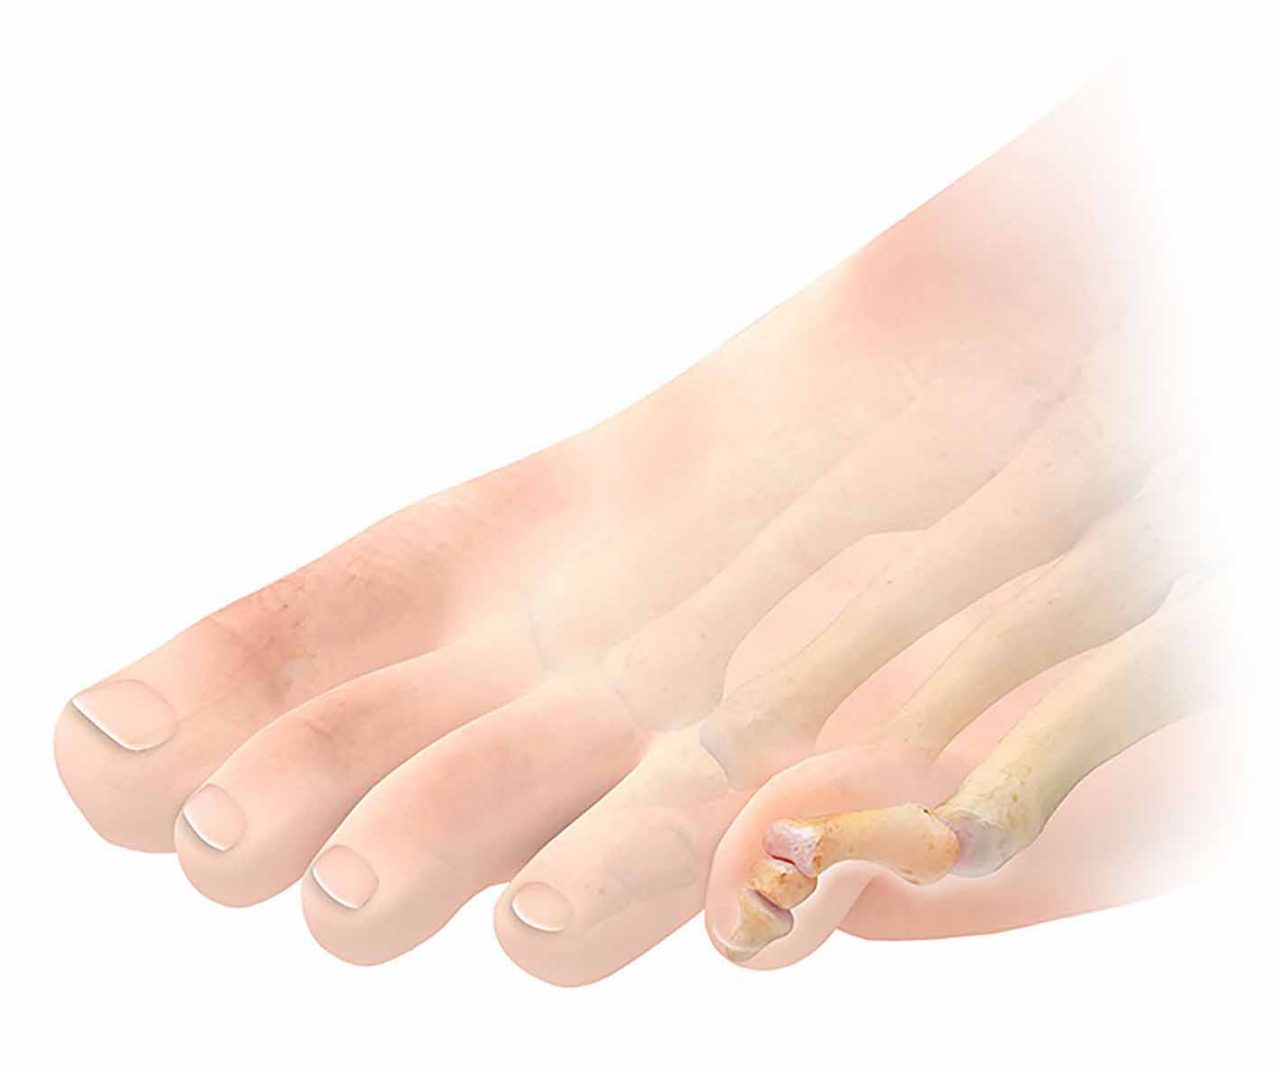 What is a Hammer Toe?  What is the Main Cause of Hammer Toes